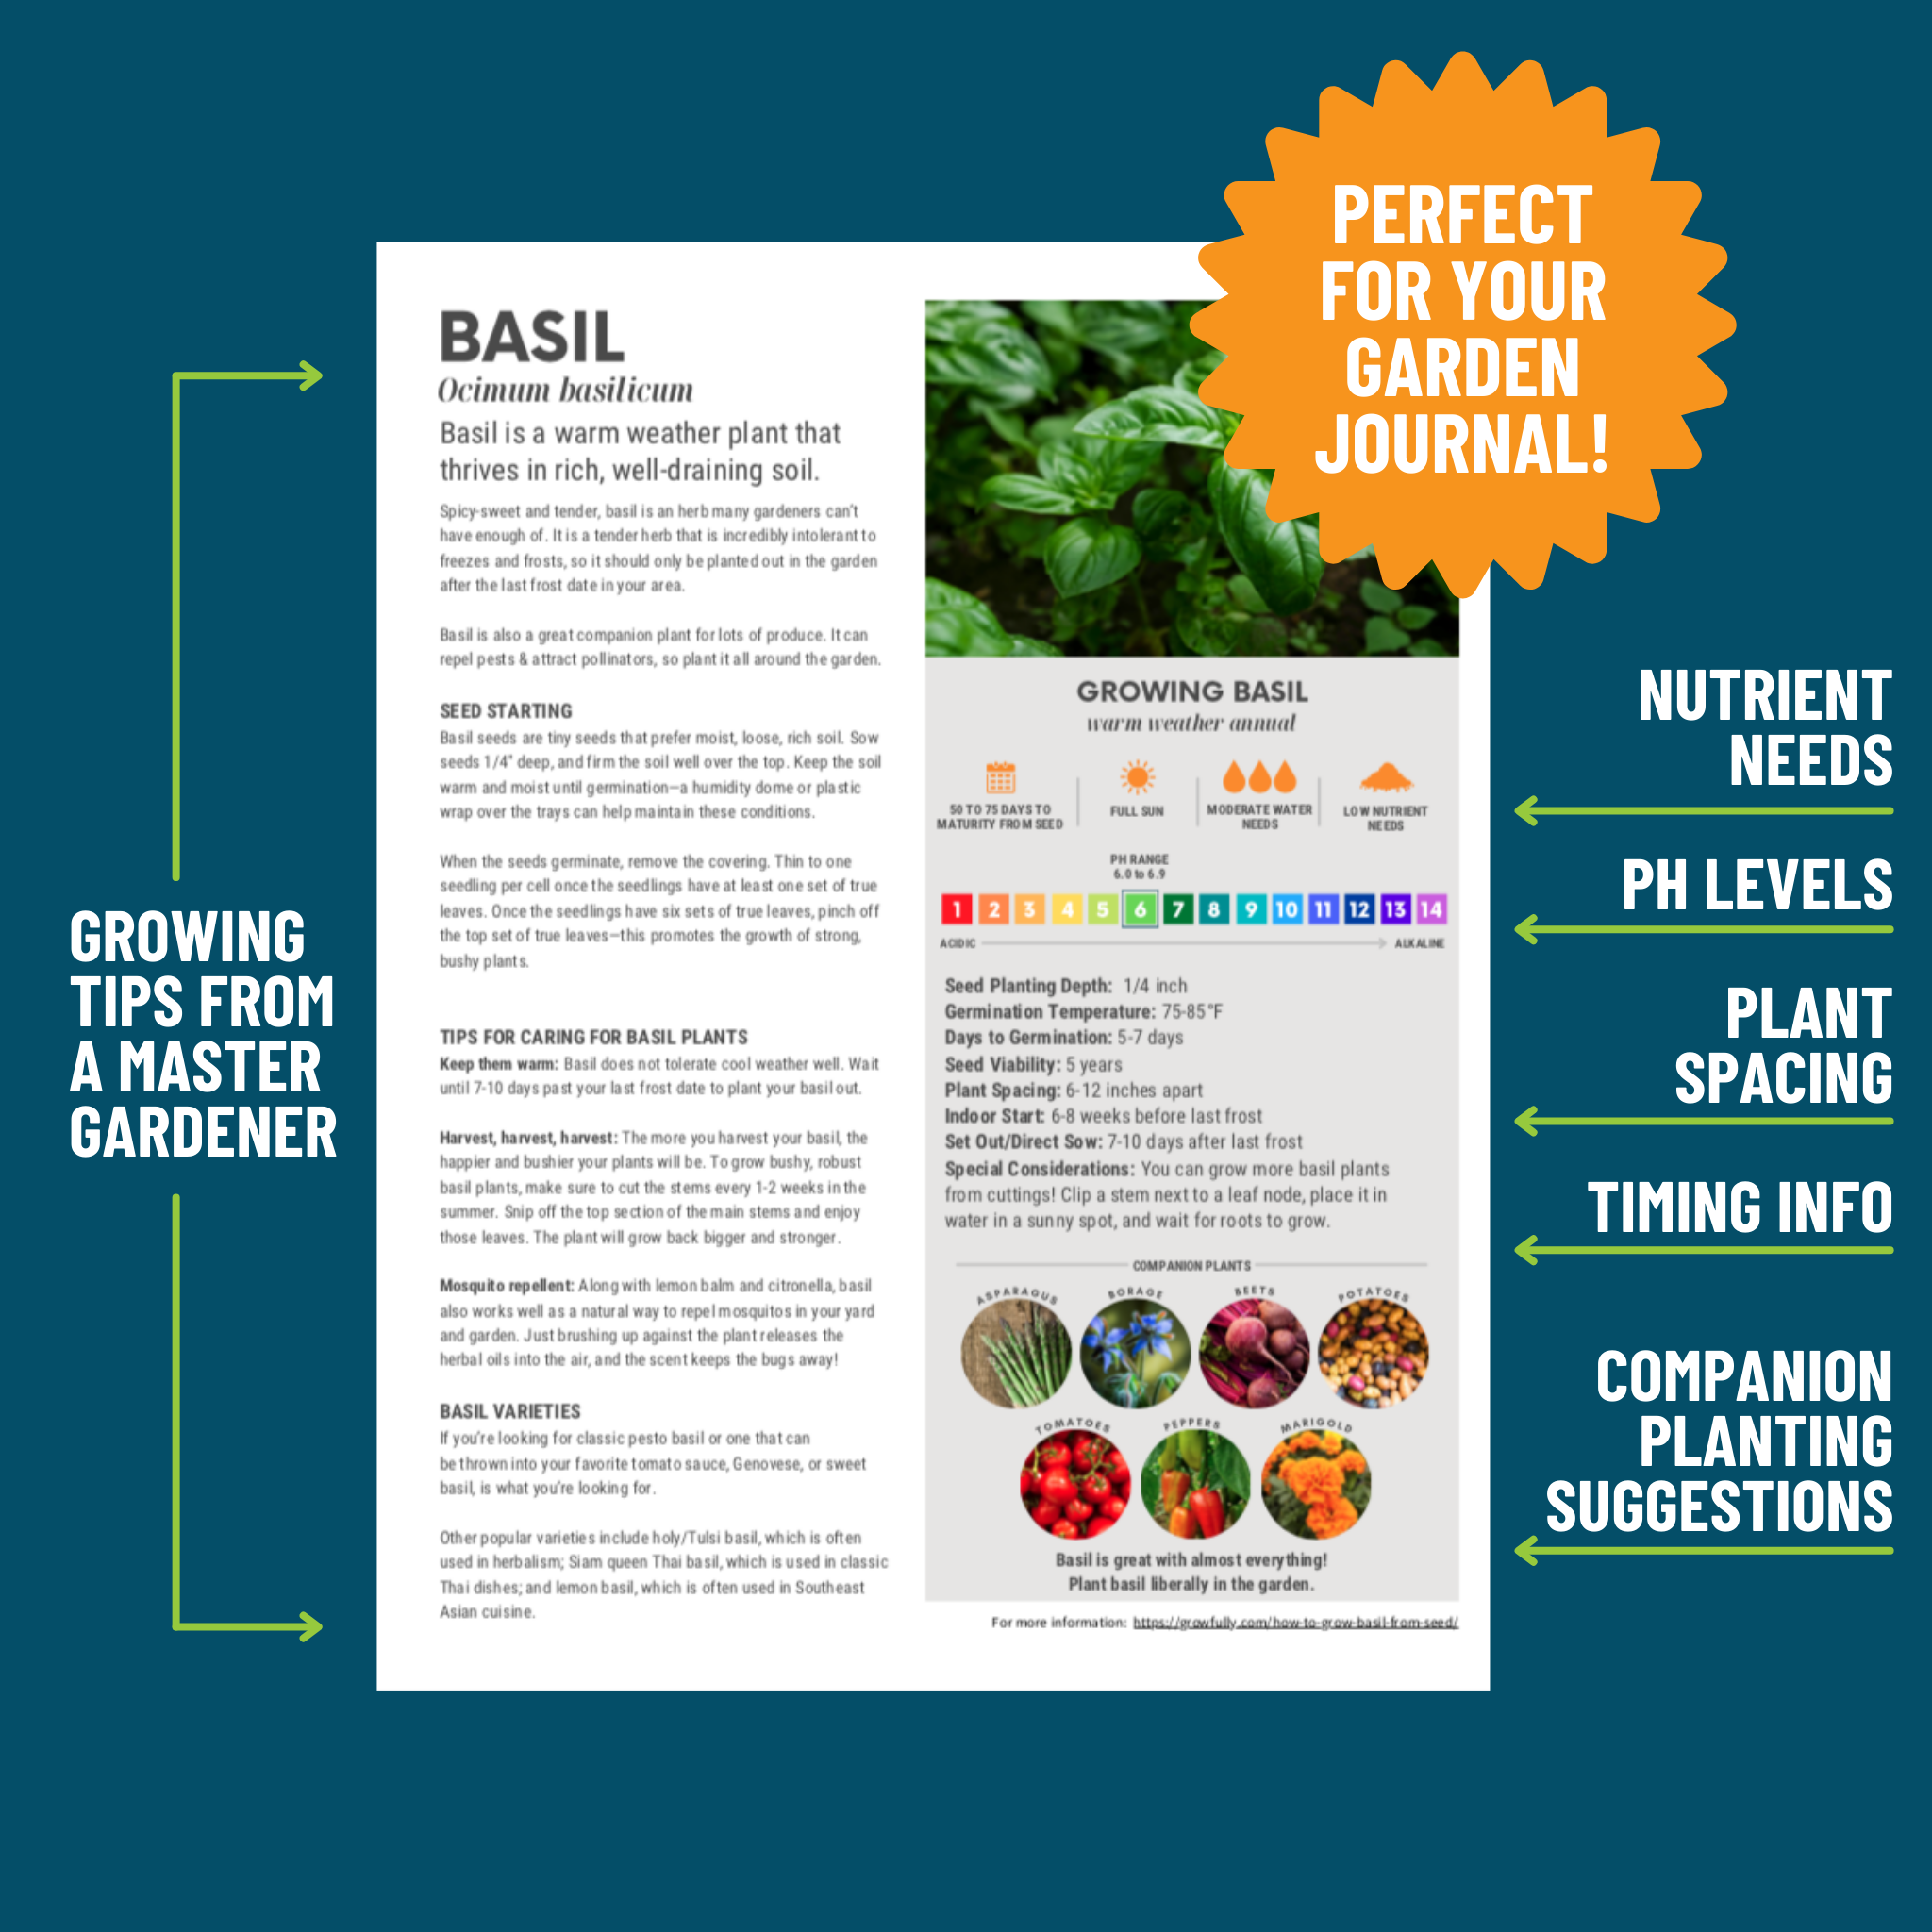 The basil growing guide is pictured on a blue background. An orange starburst with white text reads "Perfect for your garden journal!" The guide is marked up to show Growing Tips from a Master Gardener, Nutrient Needs, pH Levels, Plant Spacing, Timing Info, and Companion Planting Suggestions